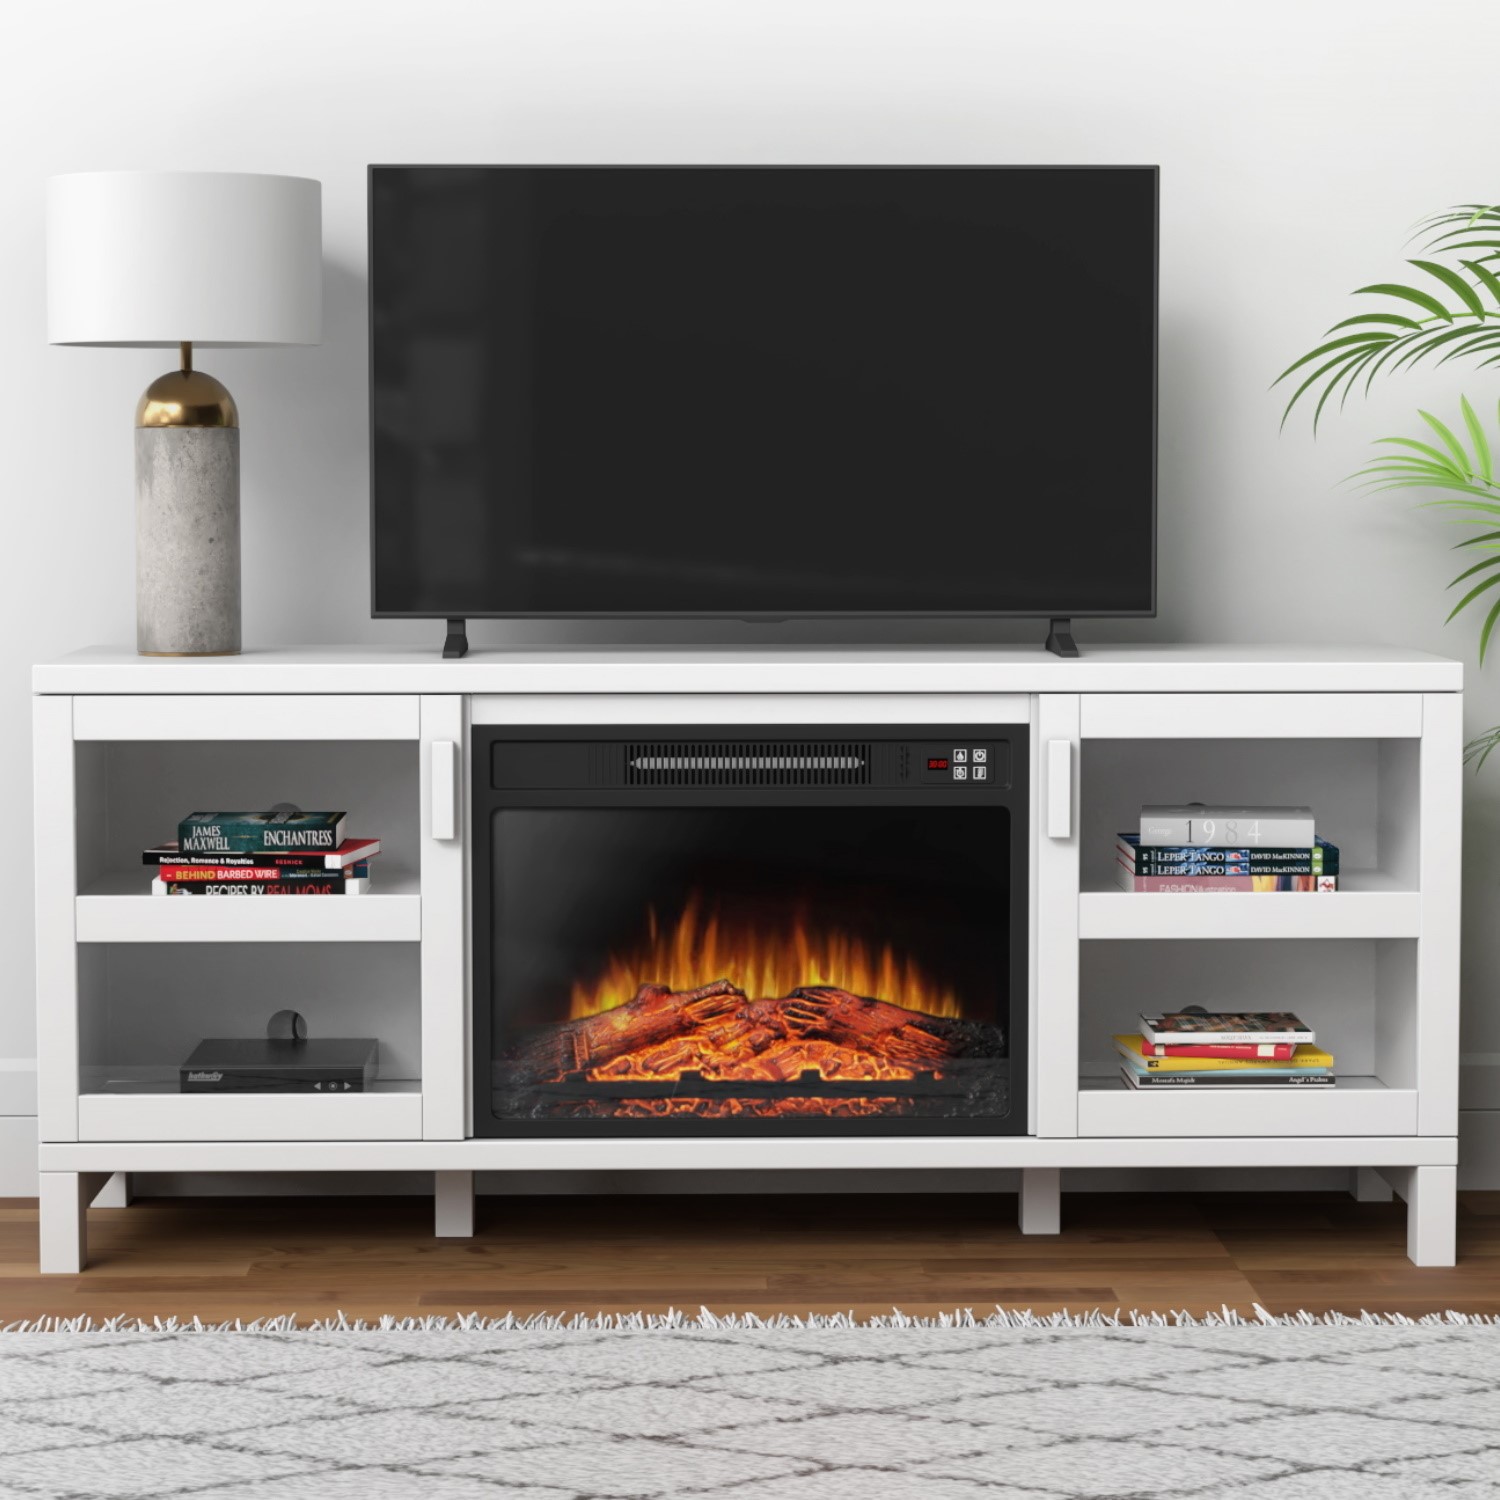 White Electric Fireplace Tv Stand With, Modern Tv Units With Fireplace